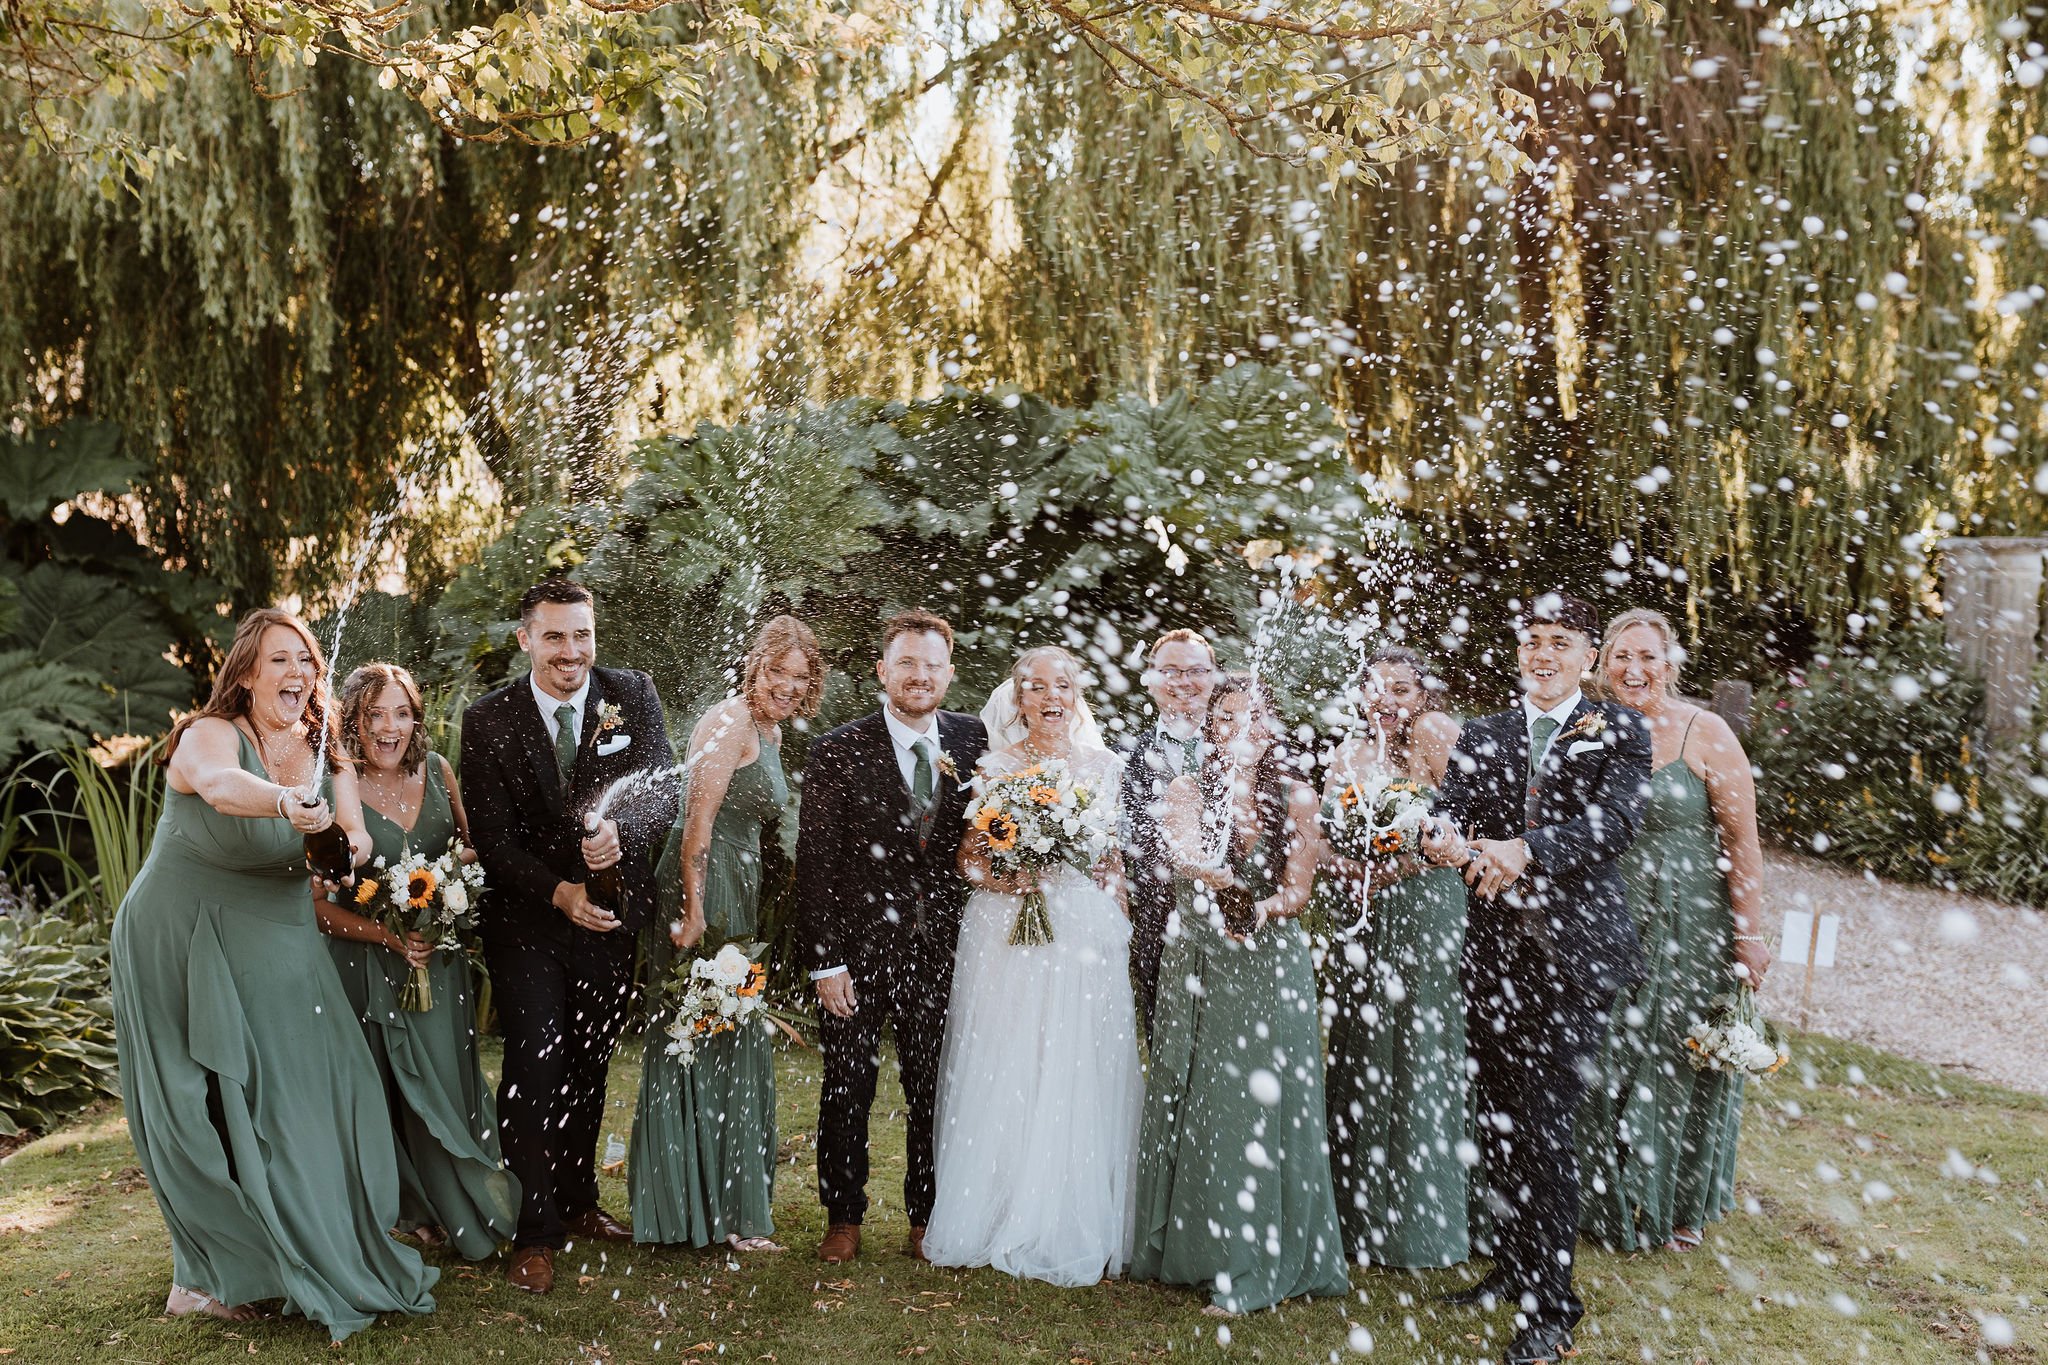  The wedding party are stood on a lawn with large foliage behind them. Various bridesmaids and groomsmen are spraying champagne towards the photographer with the bride and groom stood in the centre laughing and smiling. The bride is wearing a long wh